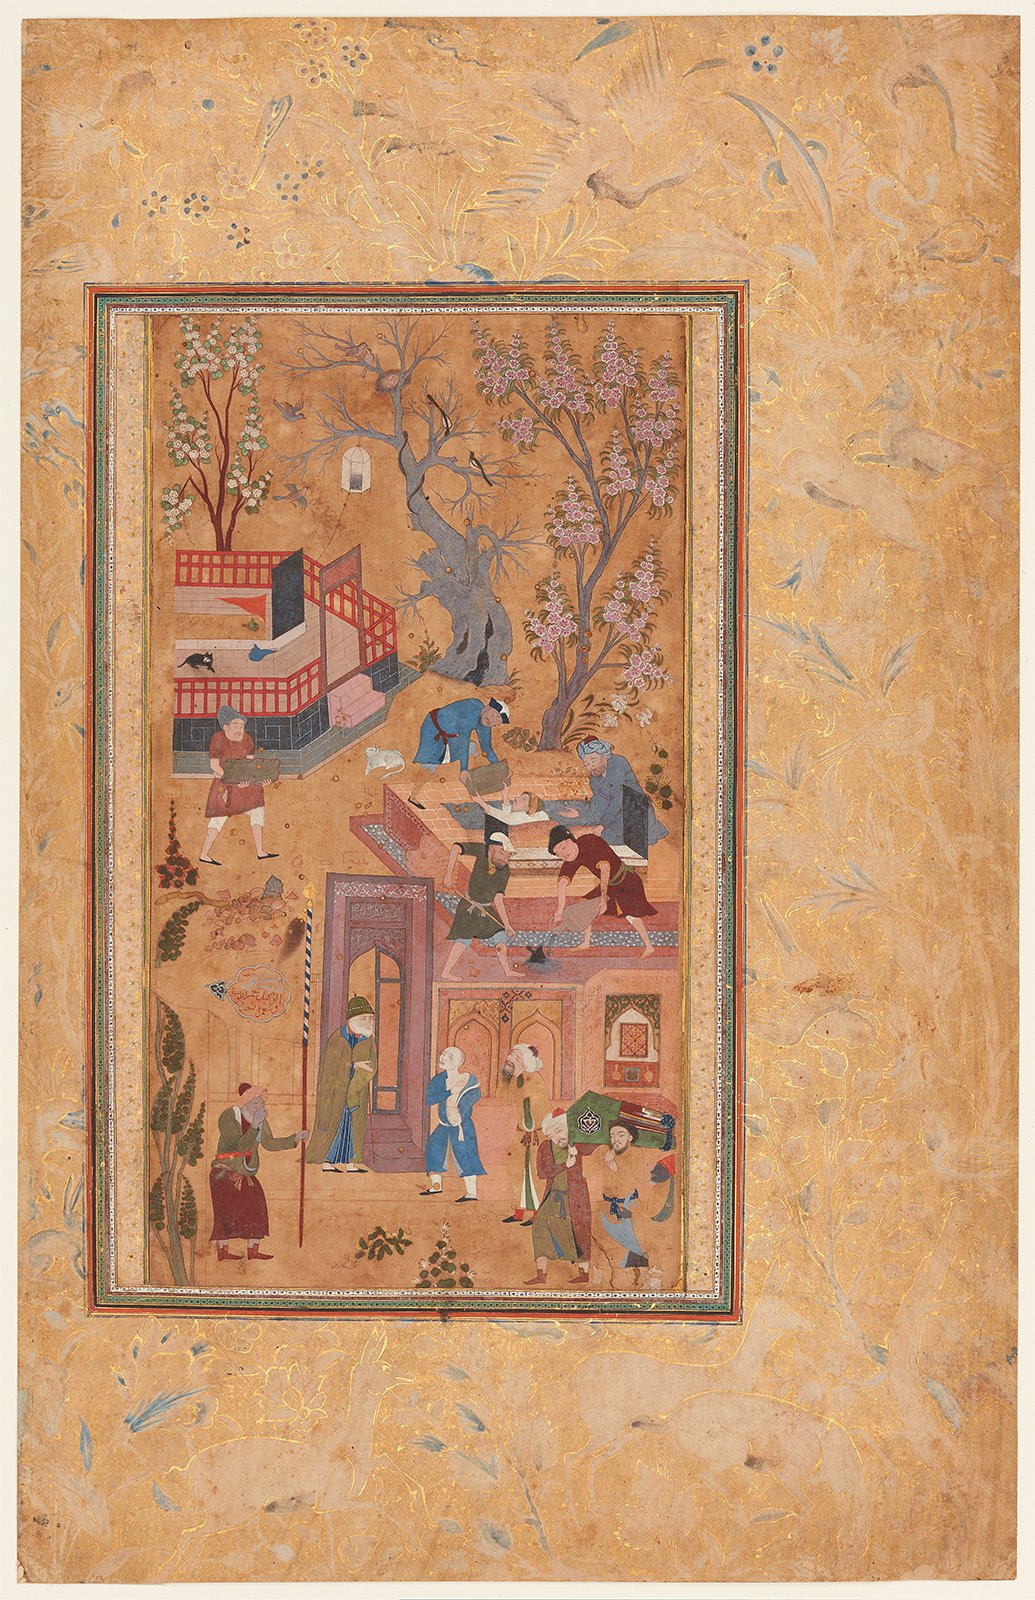 The Son who Mourned his Father by Sahifa Banu (attributed) - c. 1620 - 22.3 x 12.2 cm Aga Khan Museum